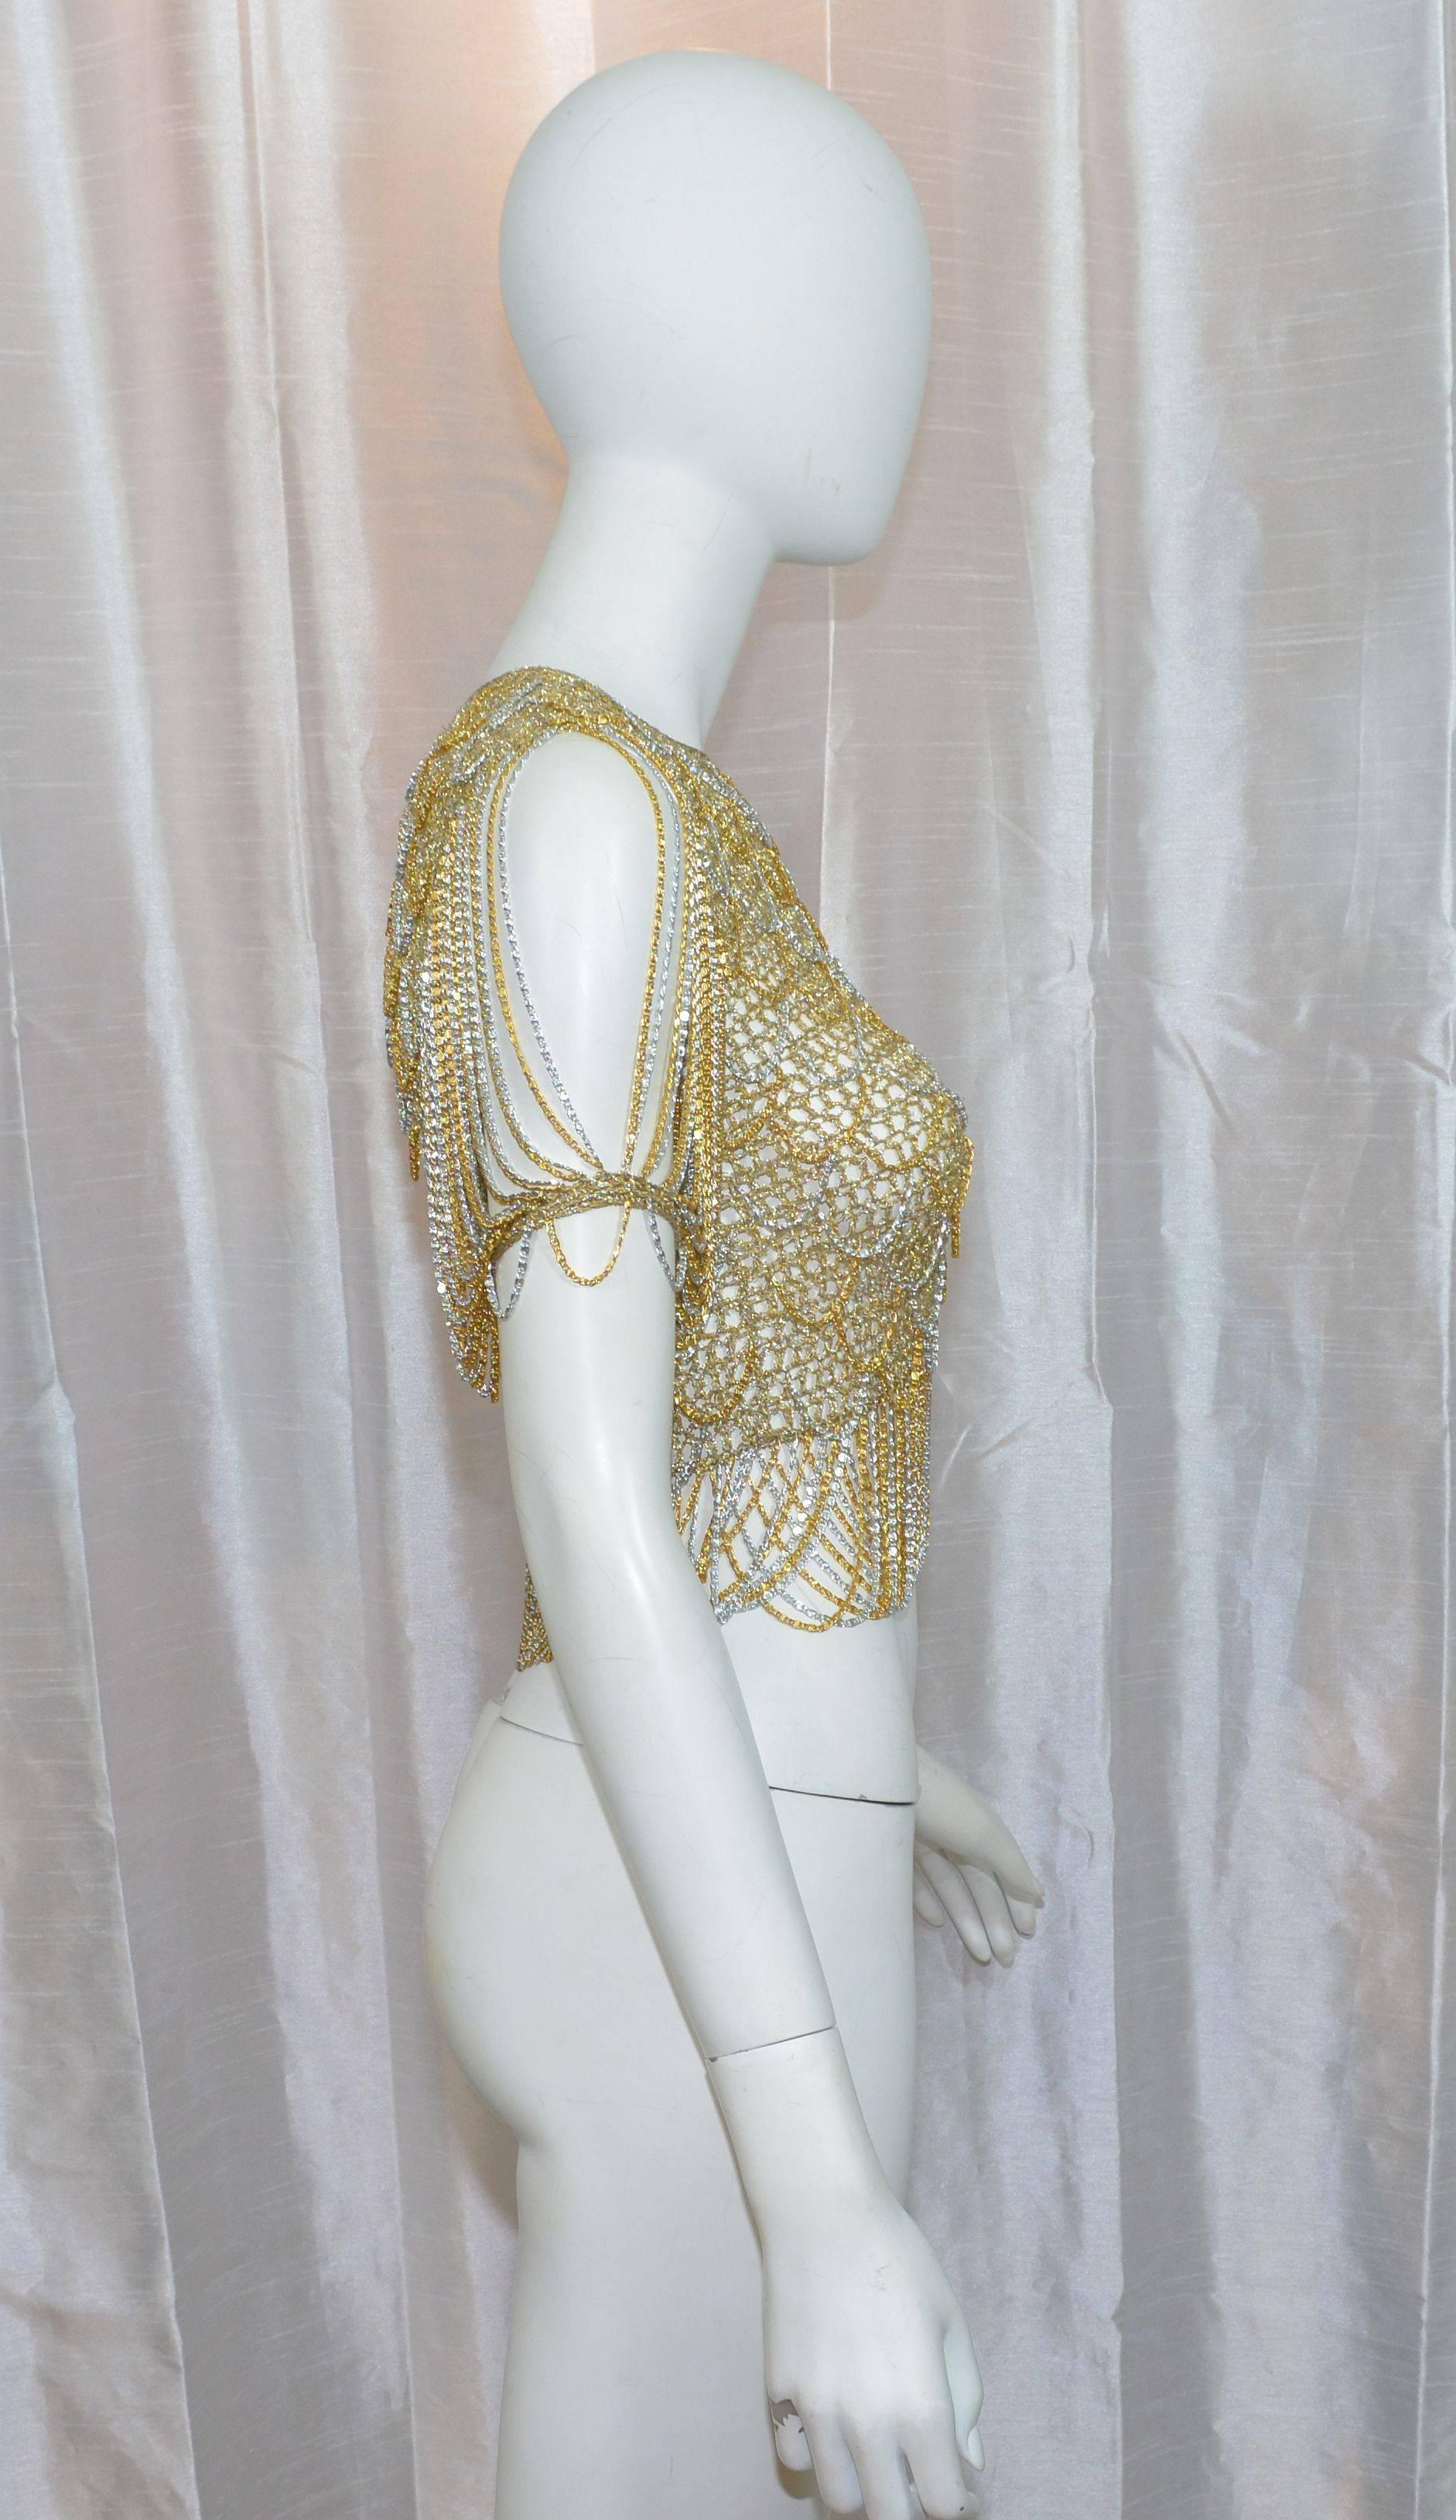 Loris Azzaro Top Metallic Gold and Silver Lurex Crochet with Chains

1970's metallic gold and silver crochet top with dangling chain detail, chain sleeves, and a faux pearl button closure on the back of the neck. Loris Azzaro was a French designer